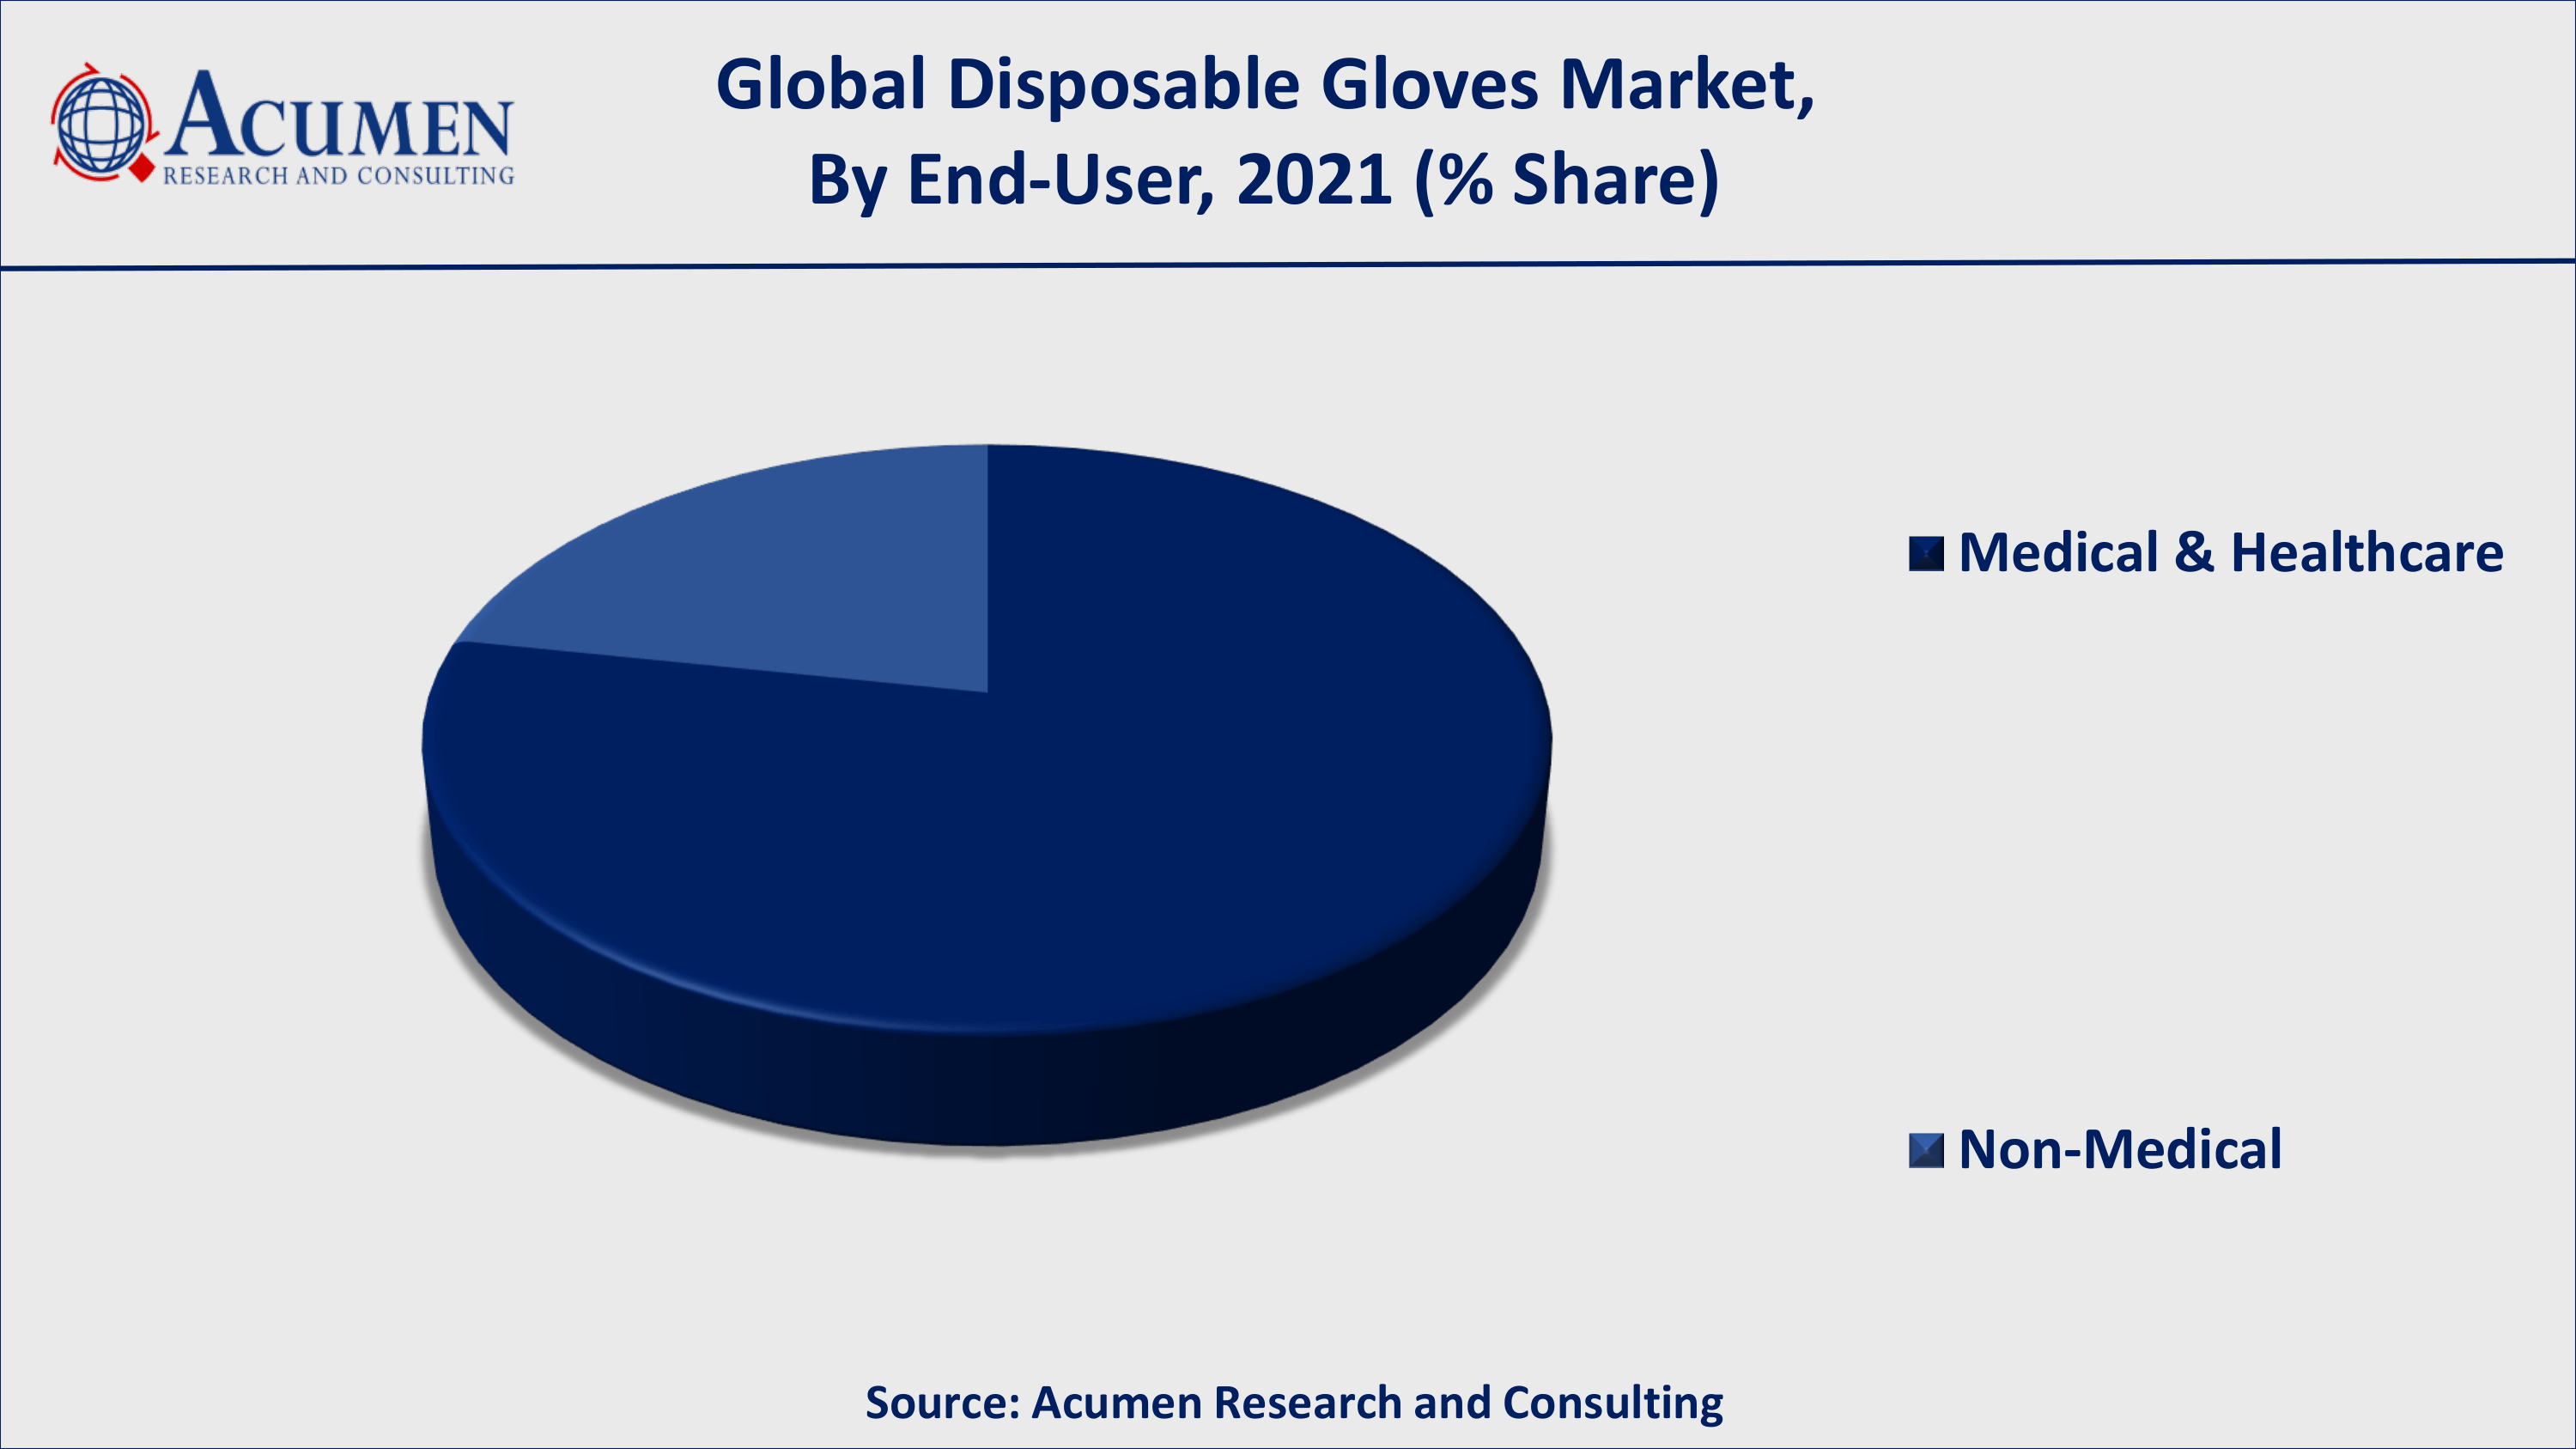 Growing safety and hygiene concerns will fuel the global disposable gloves market value